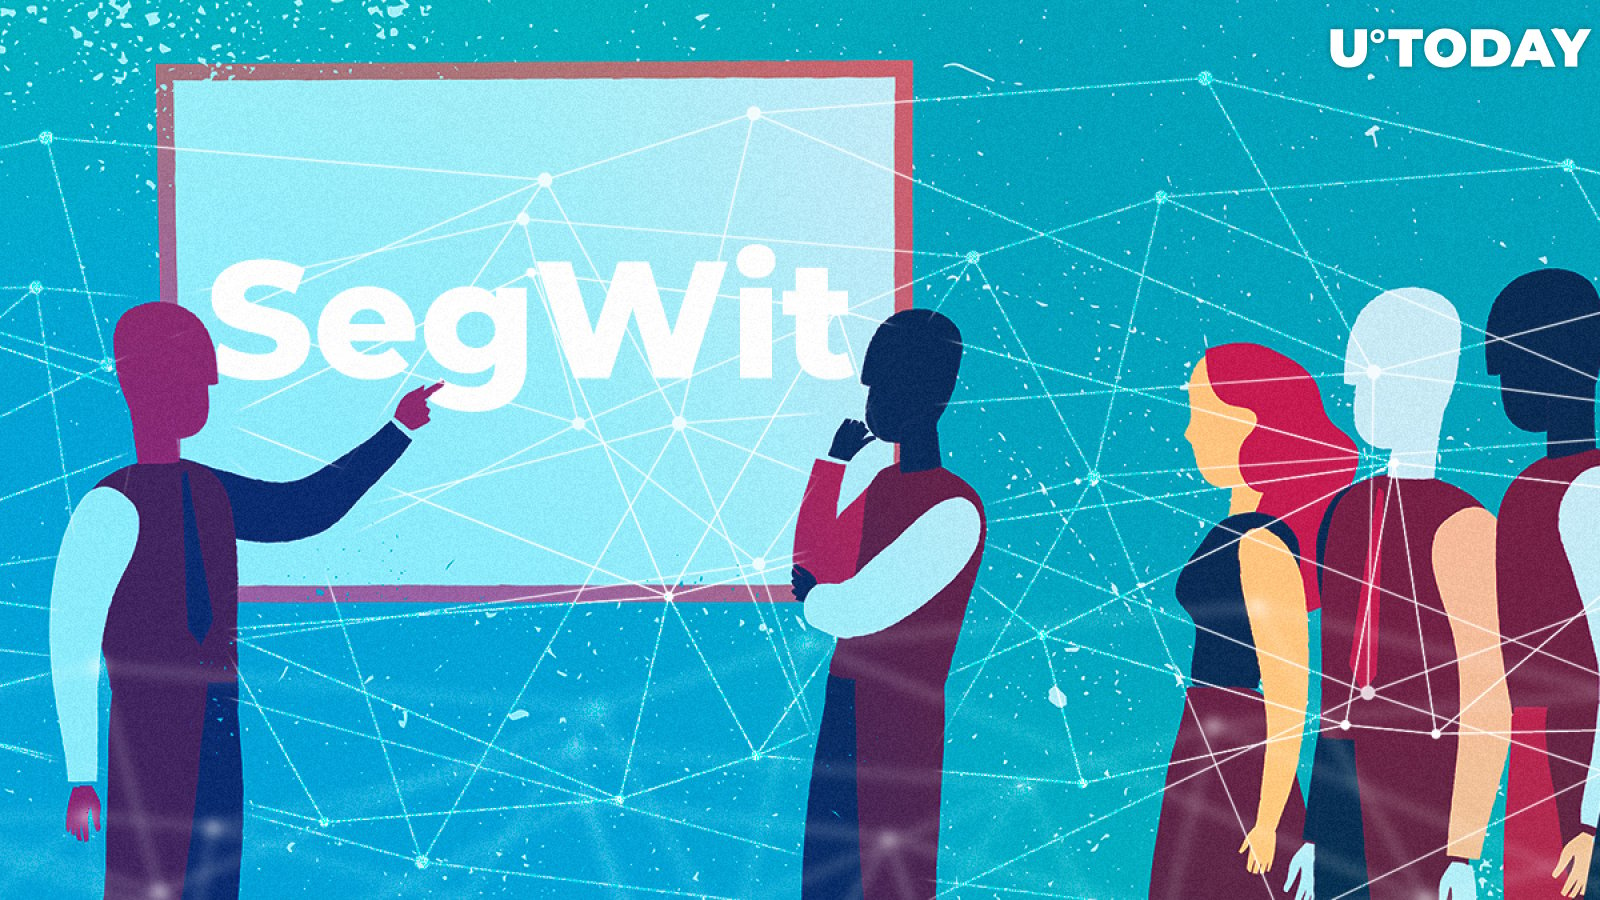 SegWit Explained: What Is Bitcoin's Segregated Witness?